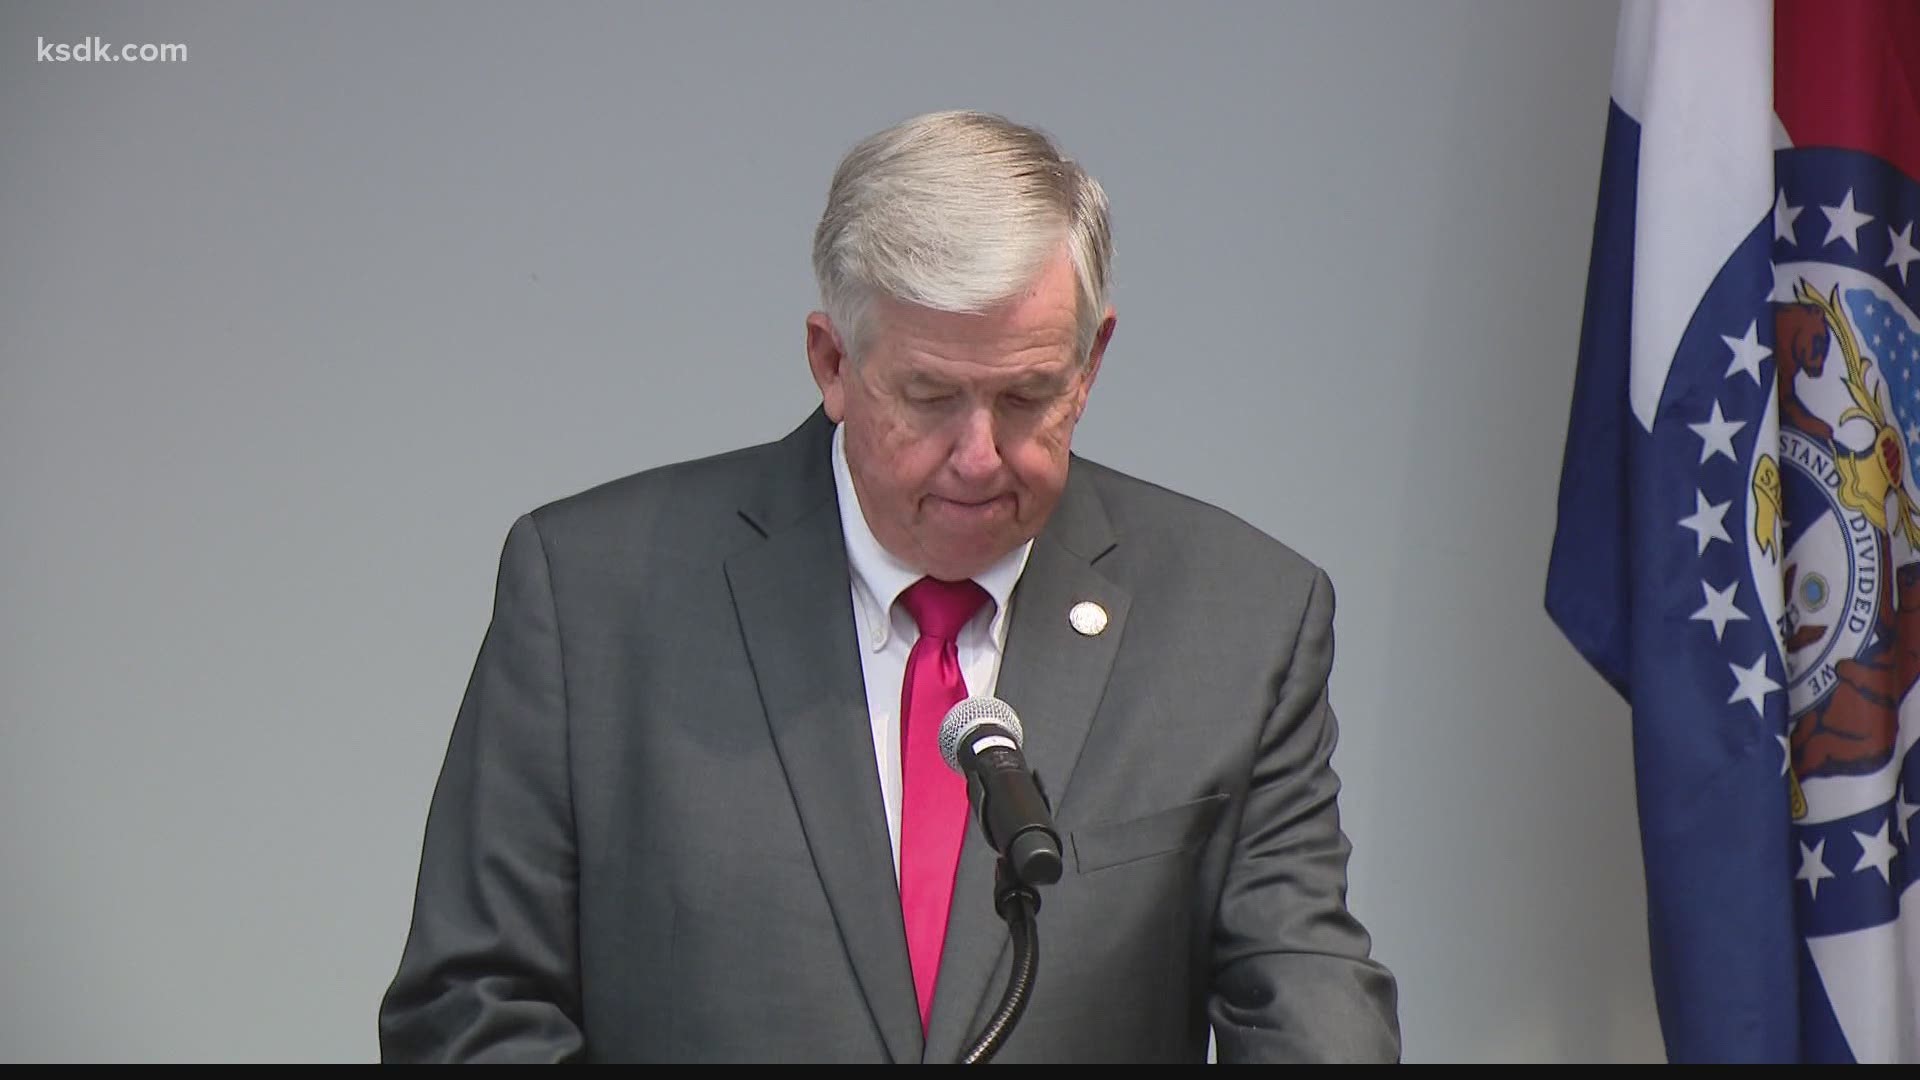 Governor Mike Parson was in St. Louis Thursday to discuss the saliva-based test, which can expand testing